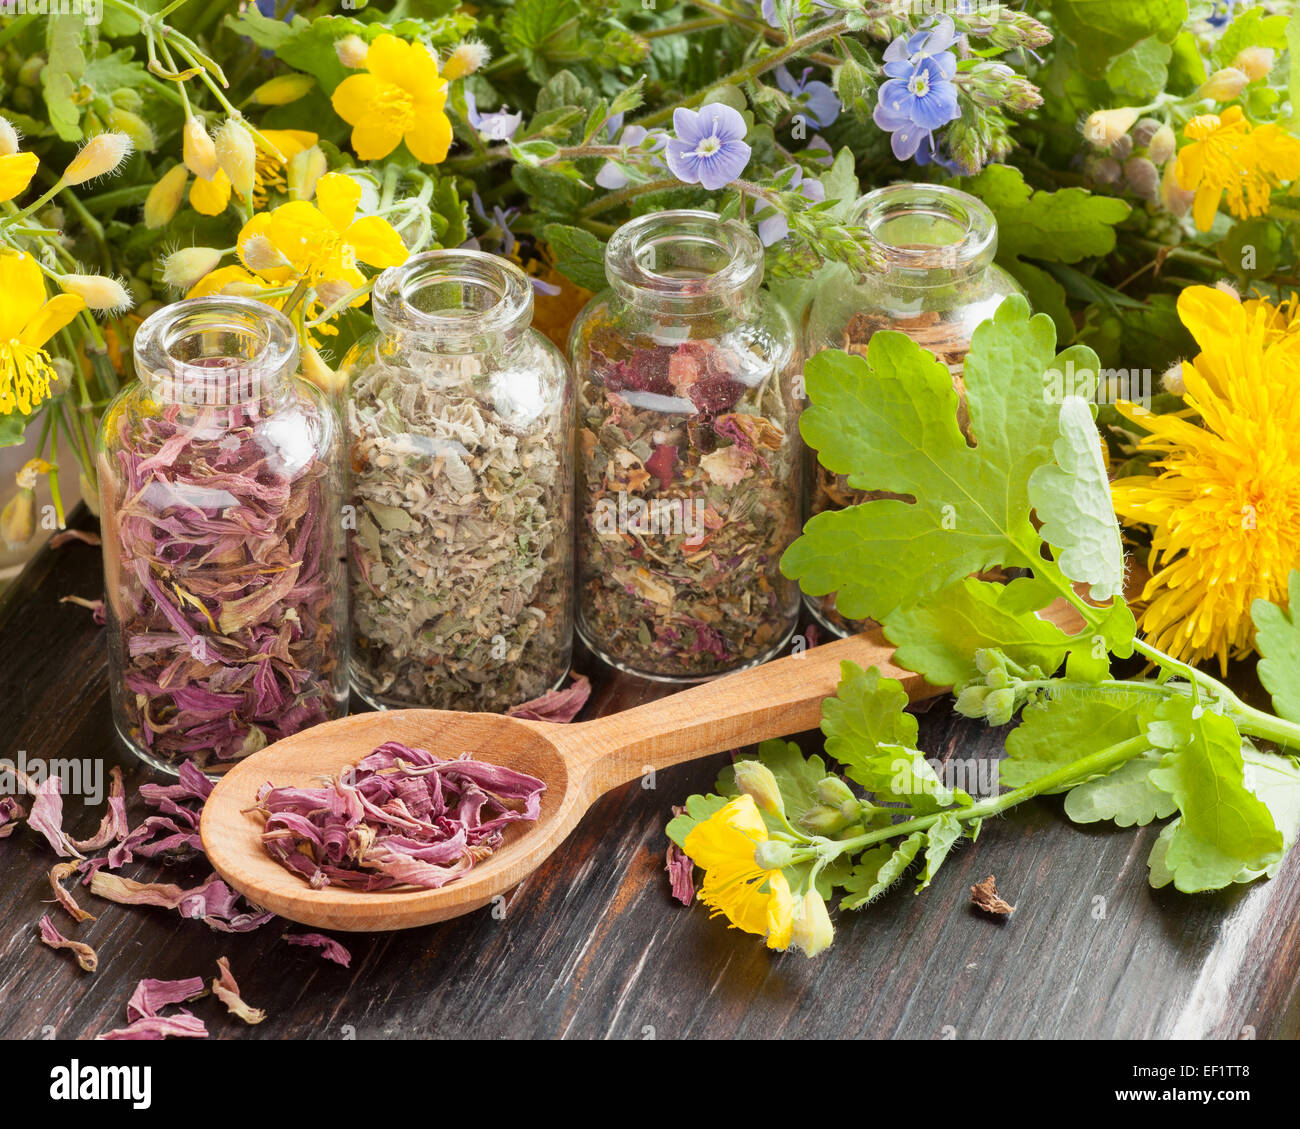 healing herbs in glass bottles, healthy plants and wooden spoon, herbal medicine Stock Photo